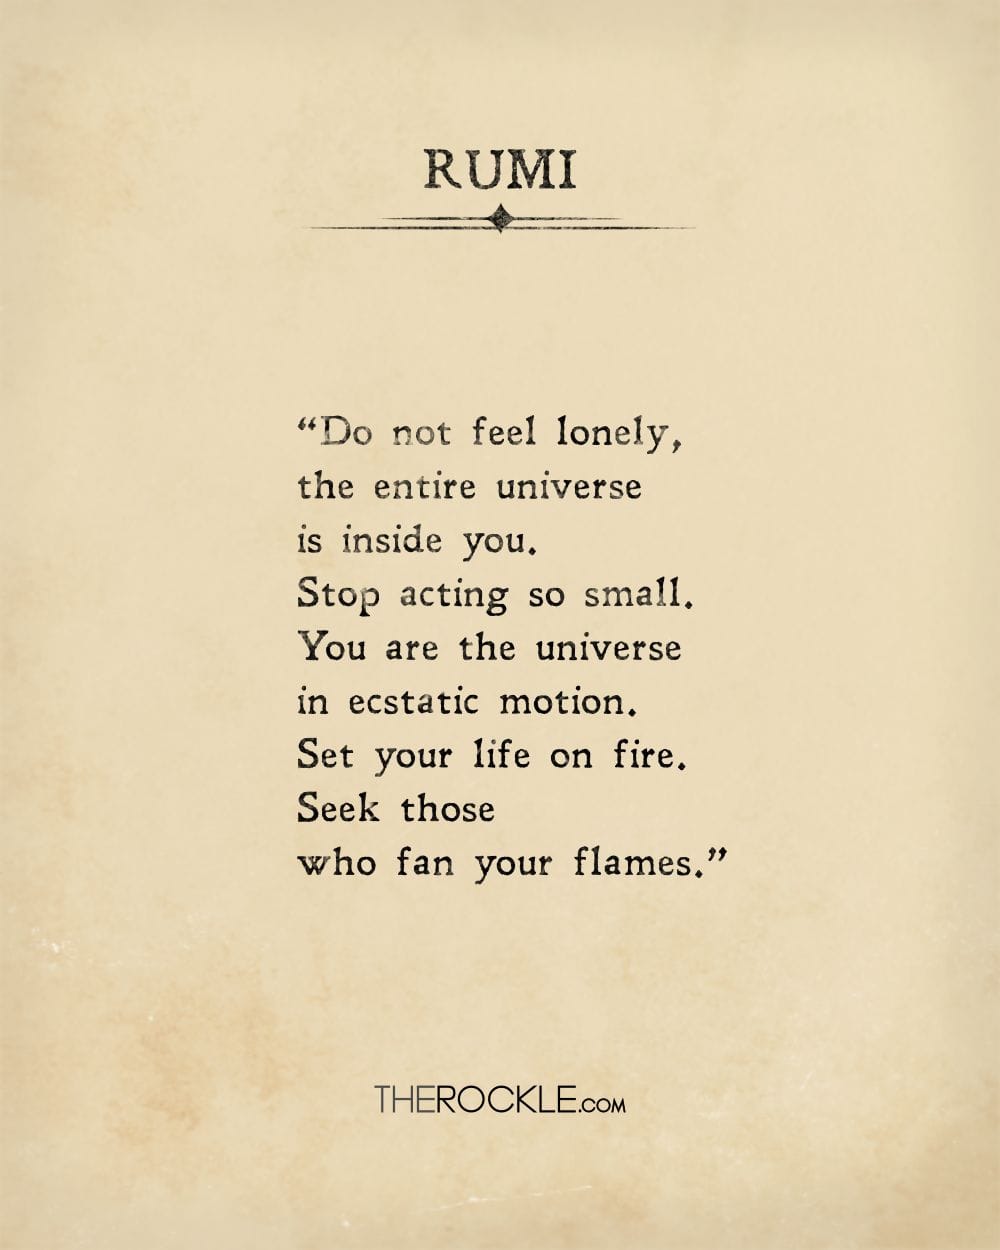 Rumi on self-discovery and empowerment